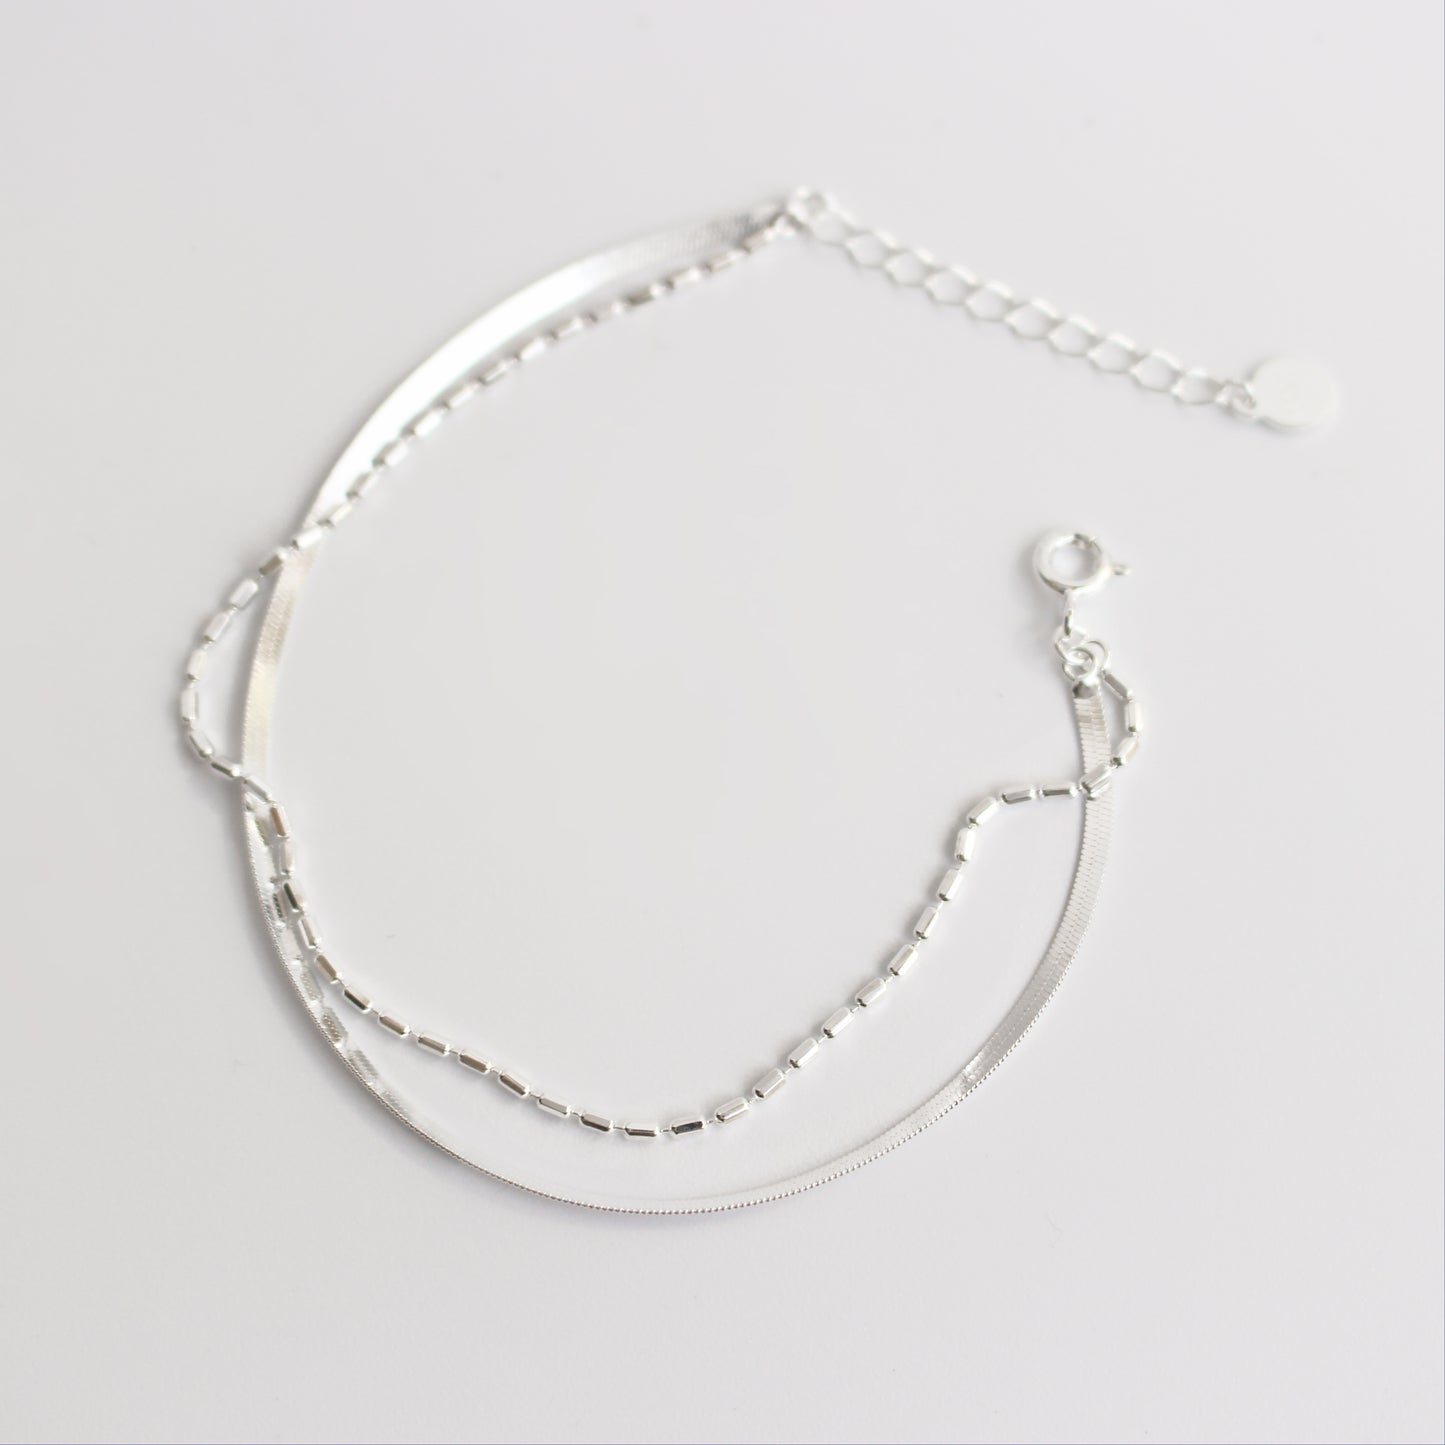 CANEO - 100% 925 Sterling Silver Double Layer Bracelet ∙ Water Resistant ∙ Herringbone Bracelet ∙ Silver Filled Beaded Chain